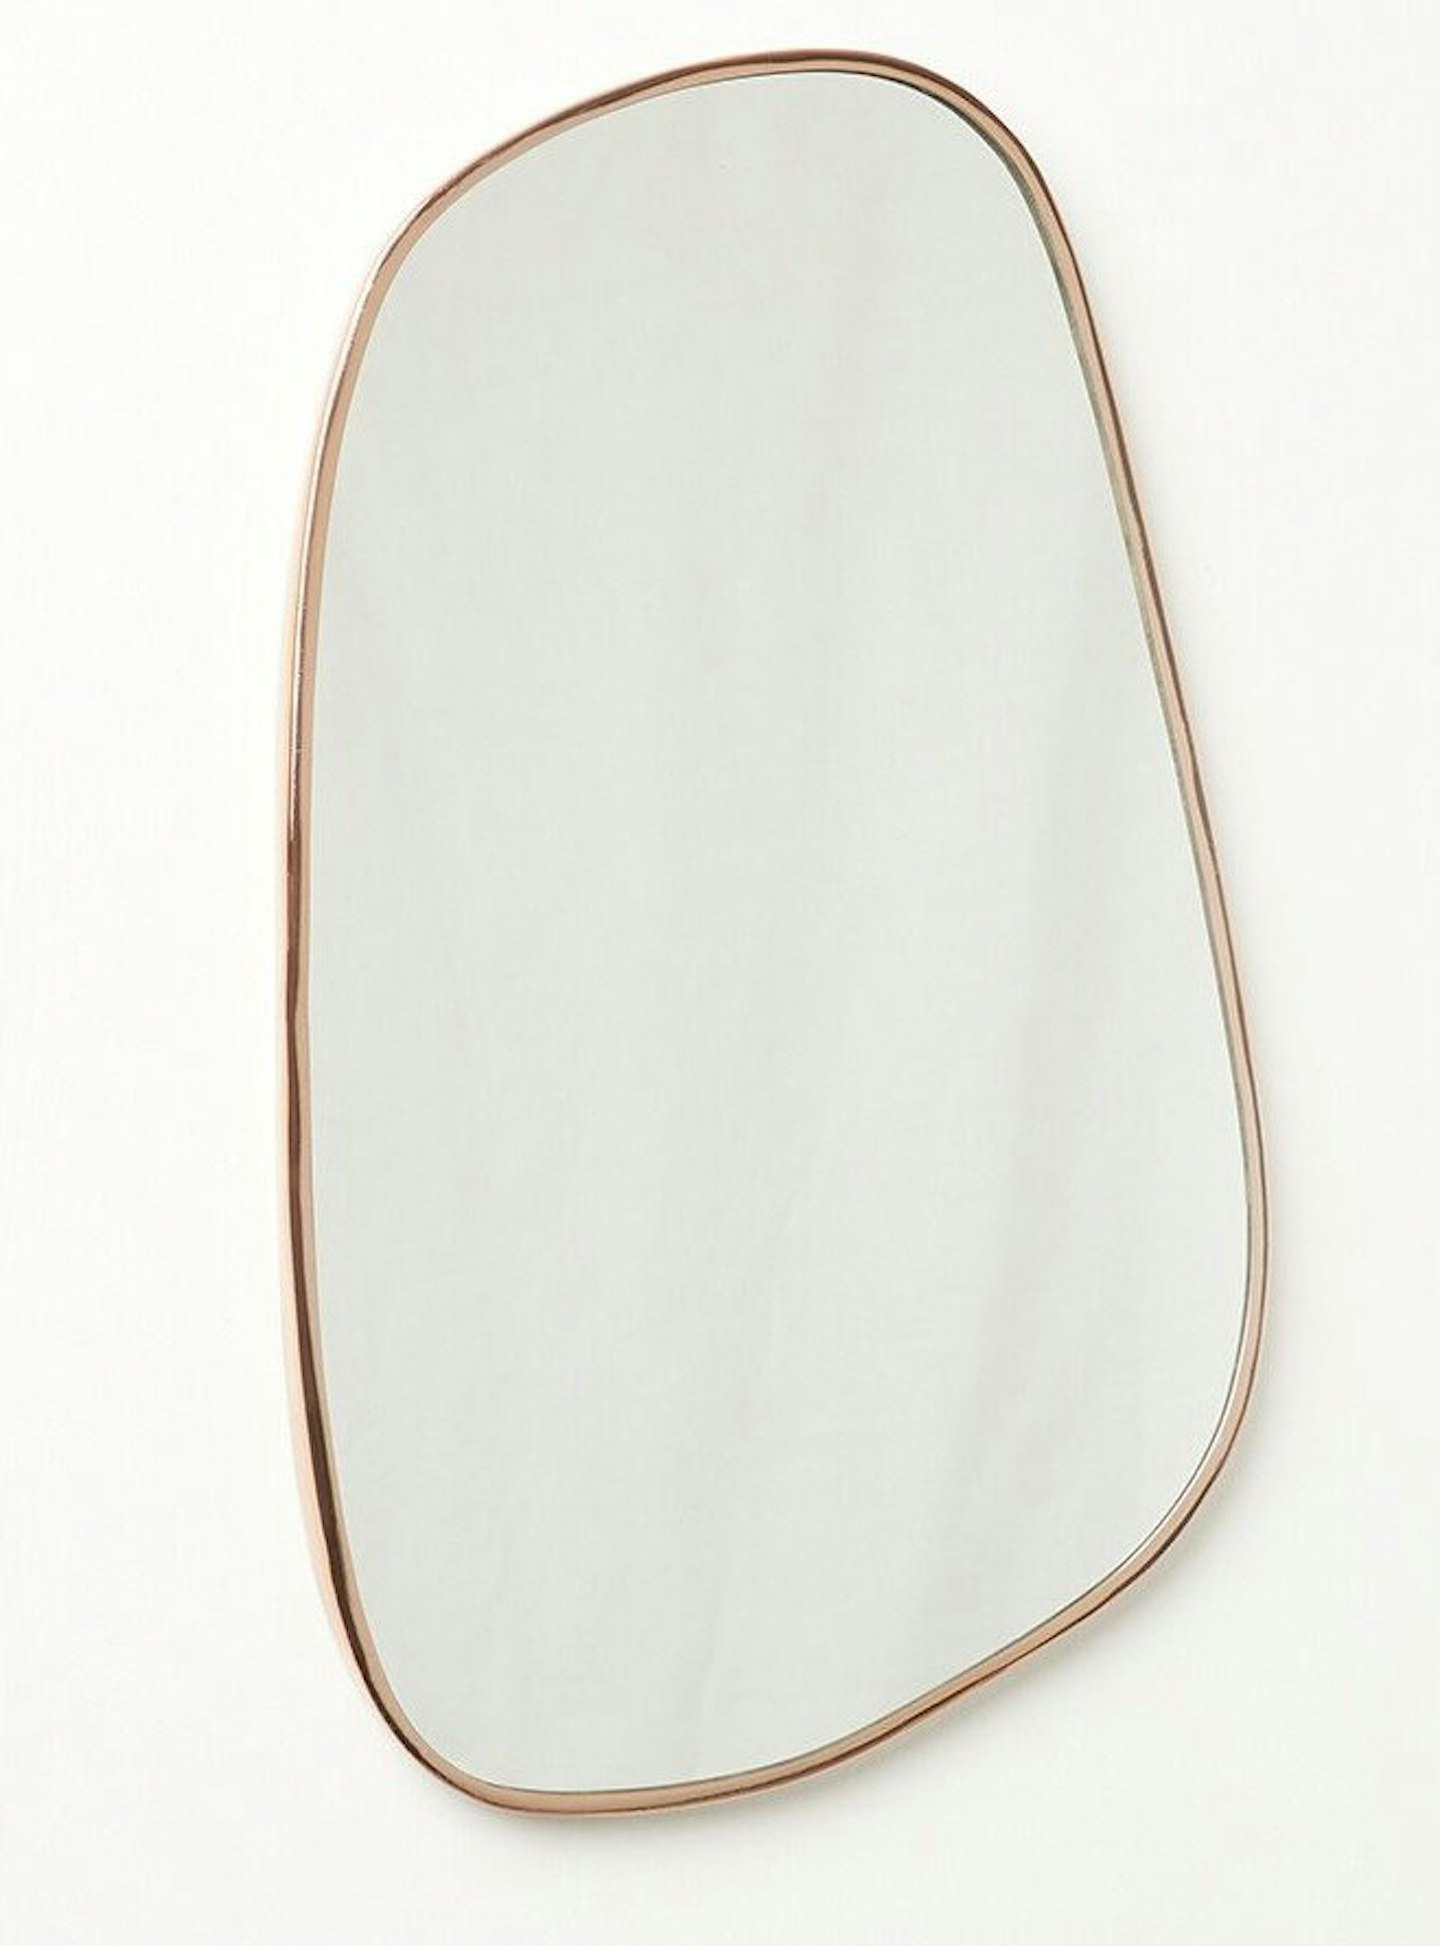 Oliver Bonas, Rose Gold Pebble Wall Mirror Large, WAS £75 NOW £45